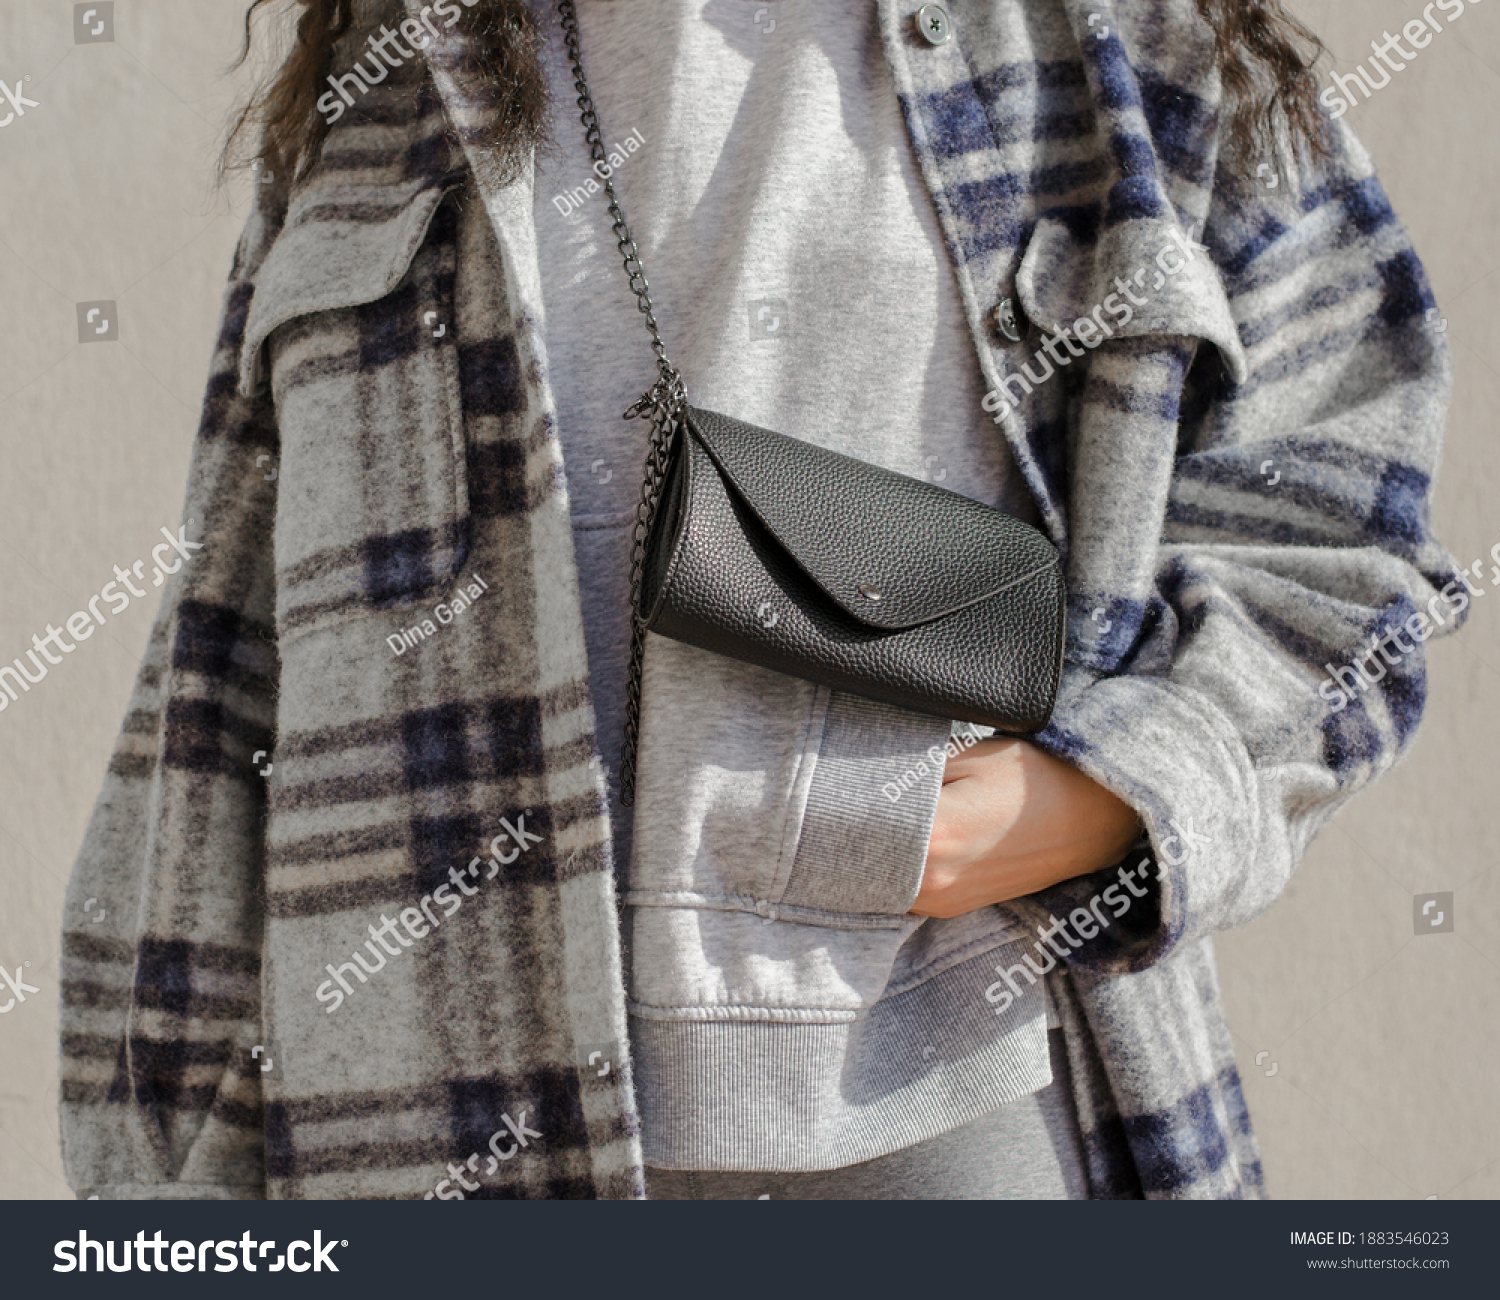 Woman wearing plaid trendy jacket on a gray hoodie with a black leather bag with her hand in her pocket. #1883546023